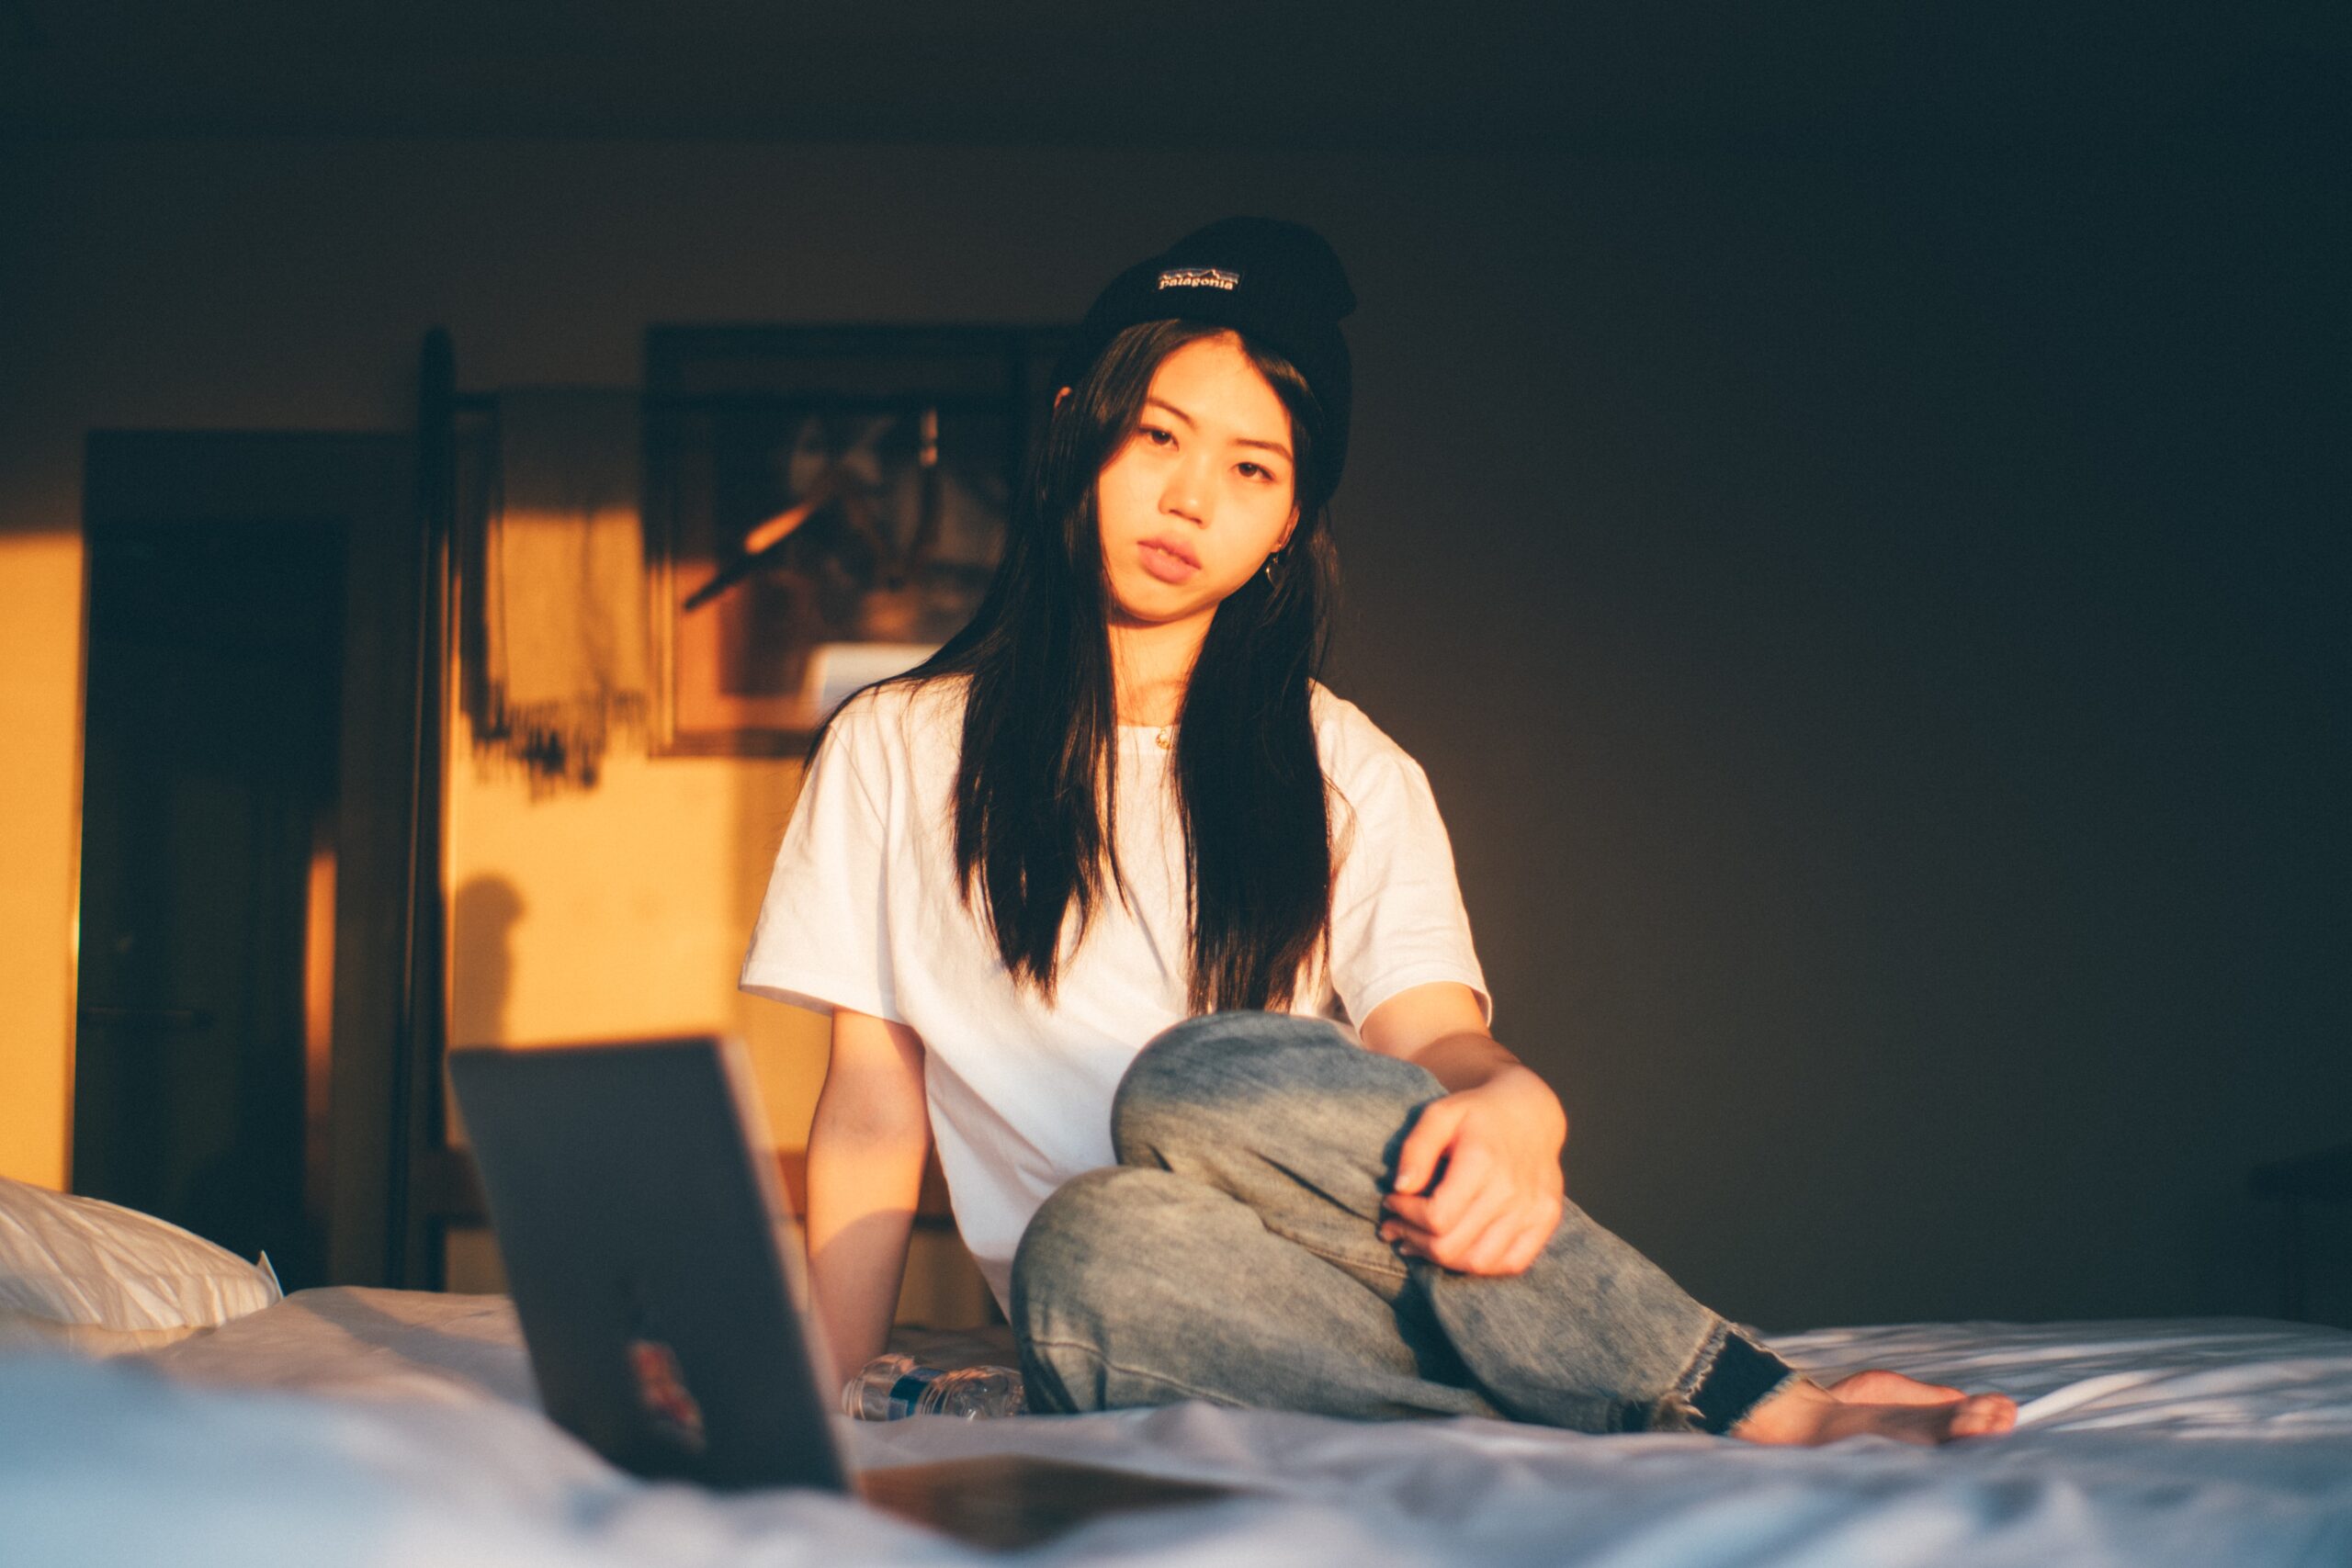 Teenage girl sitting on bed with a laptop